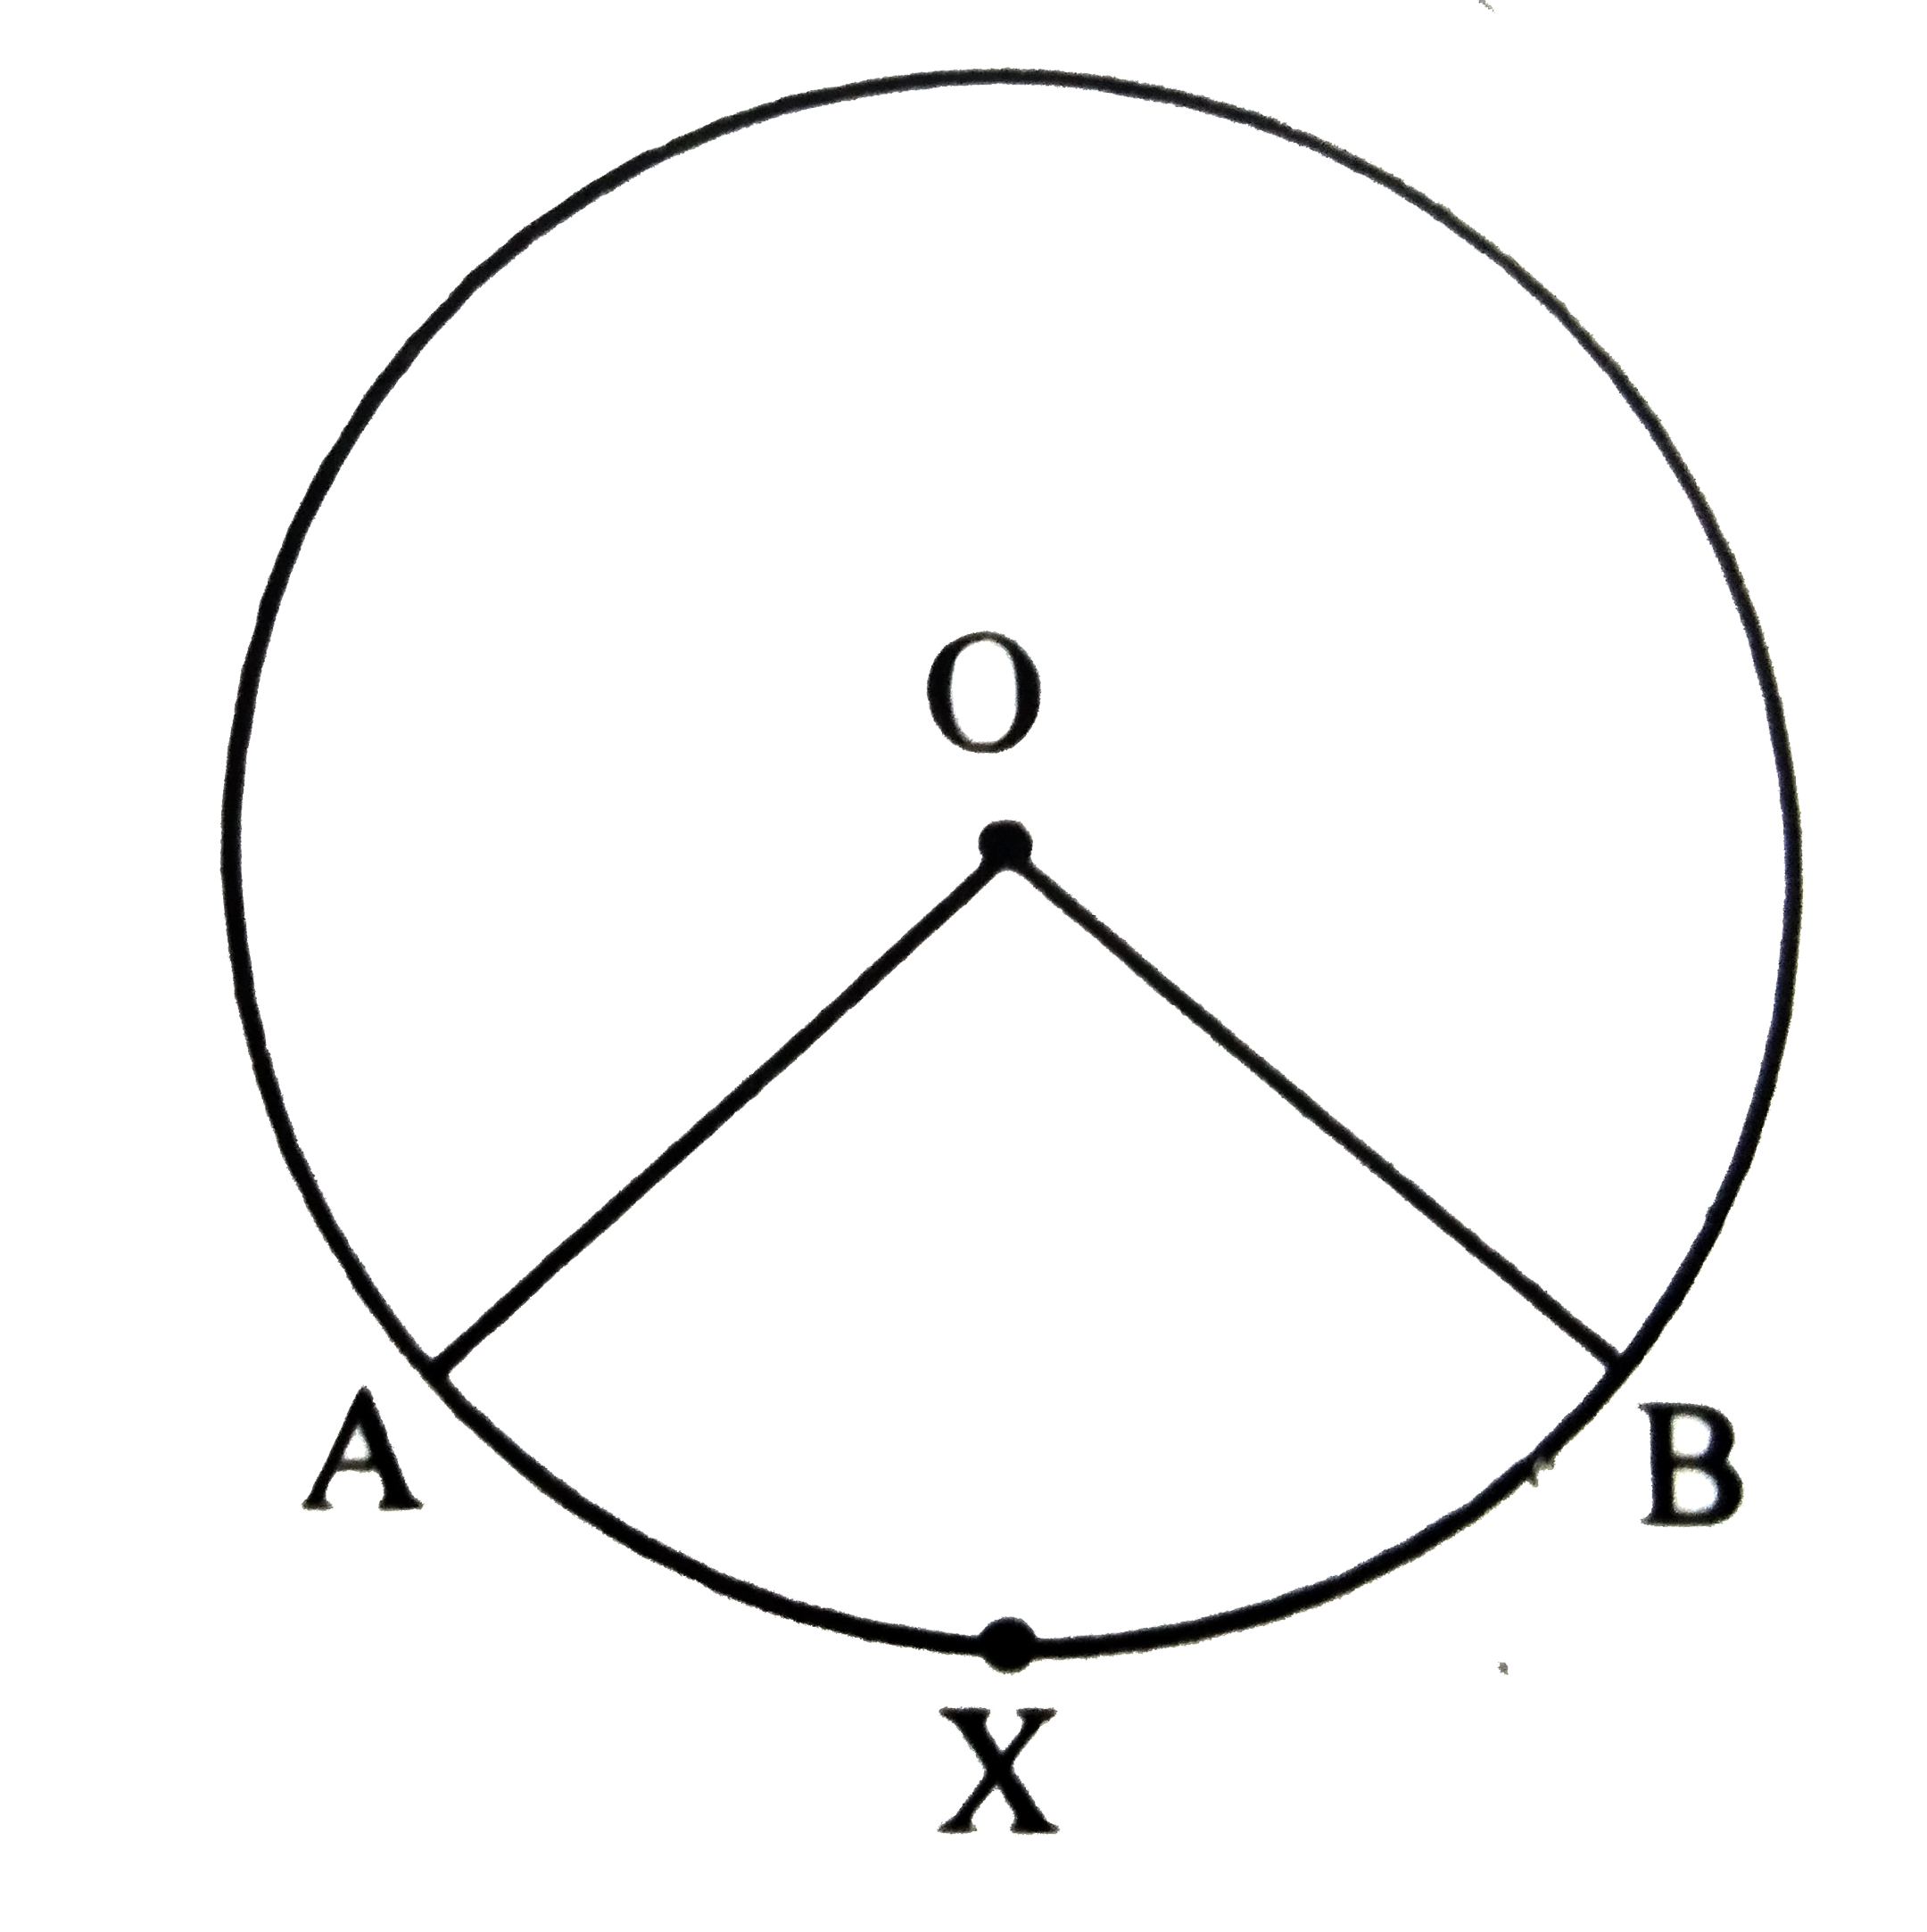 In the given figure , O is the centre of the circle. If m(arc AXB)=80^@, then mangleAOB=